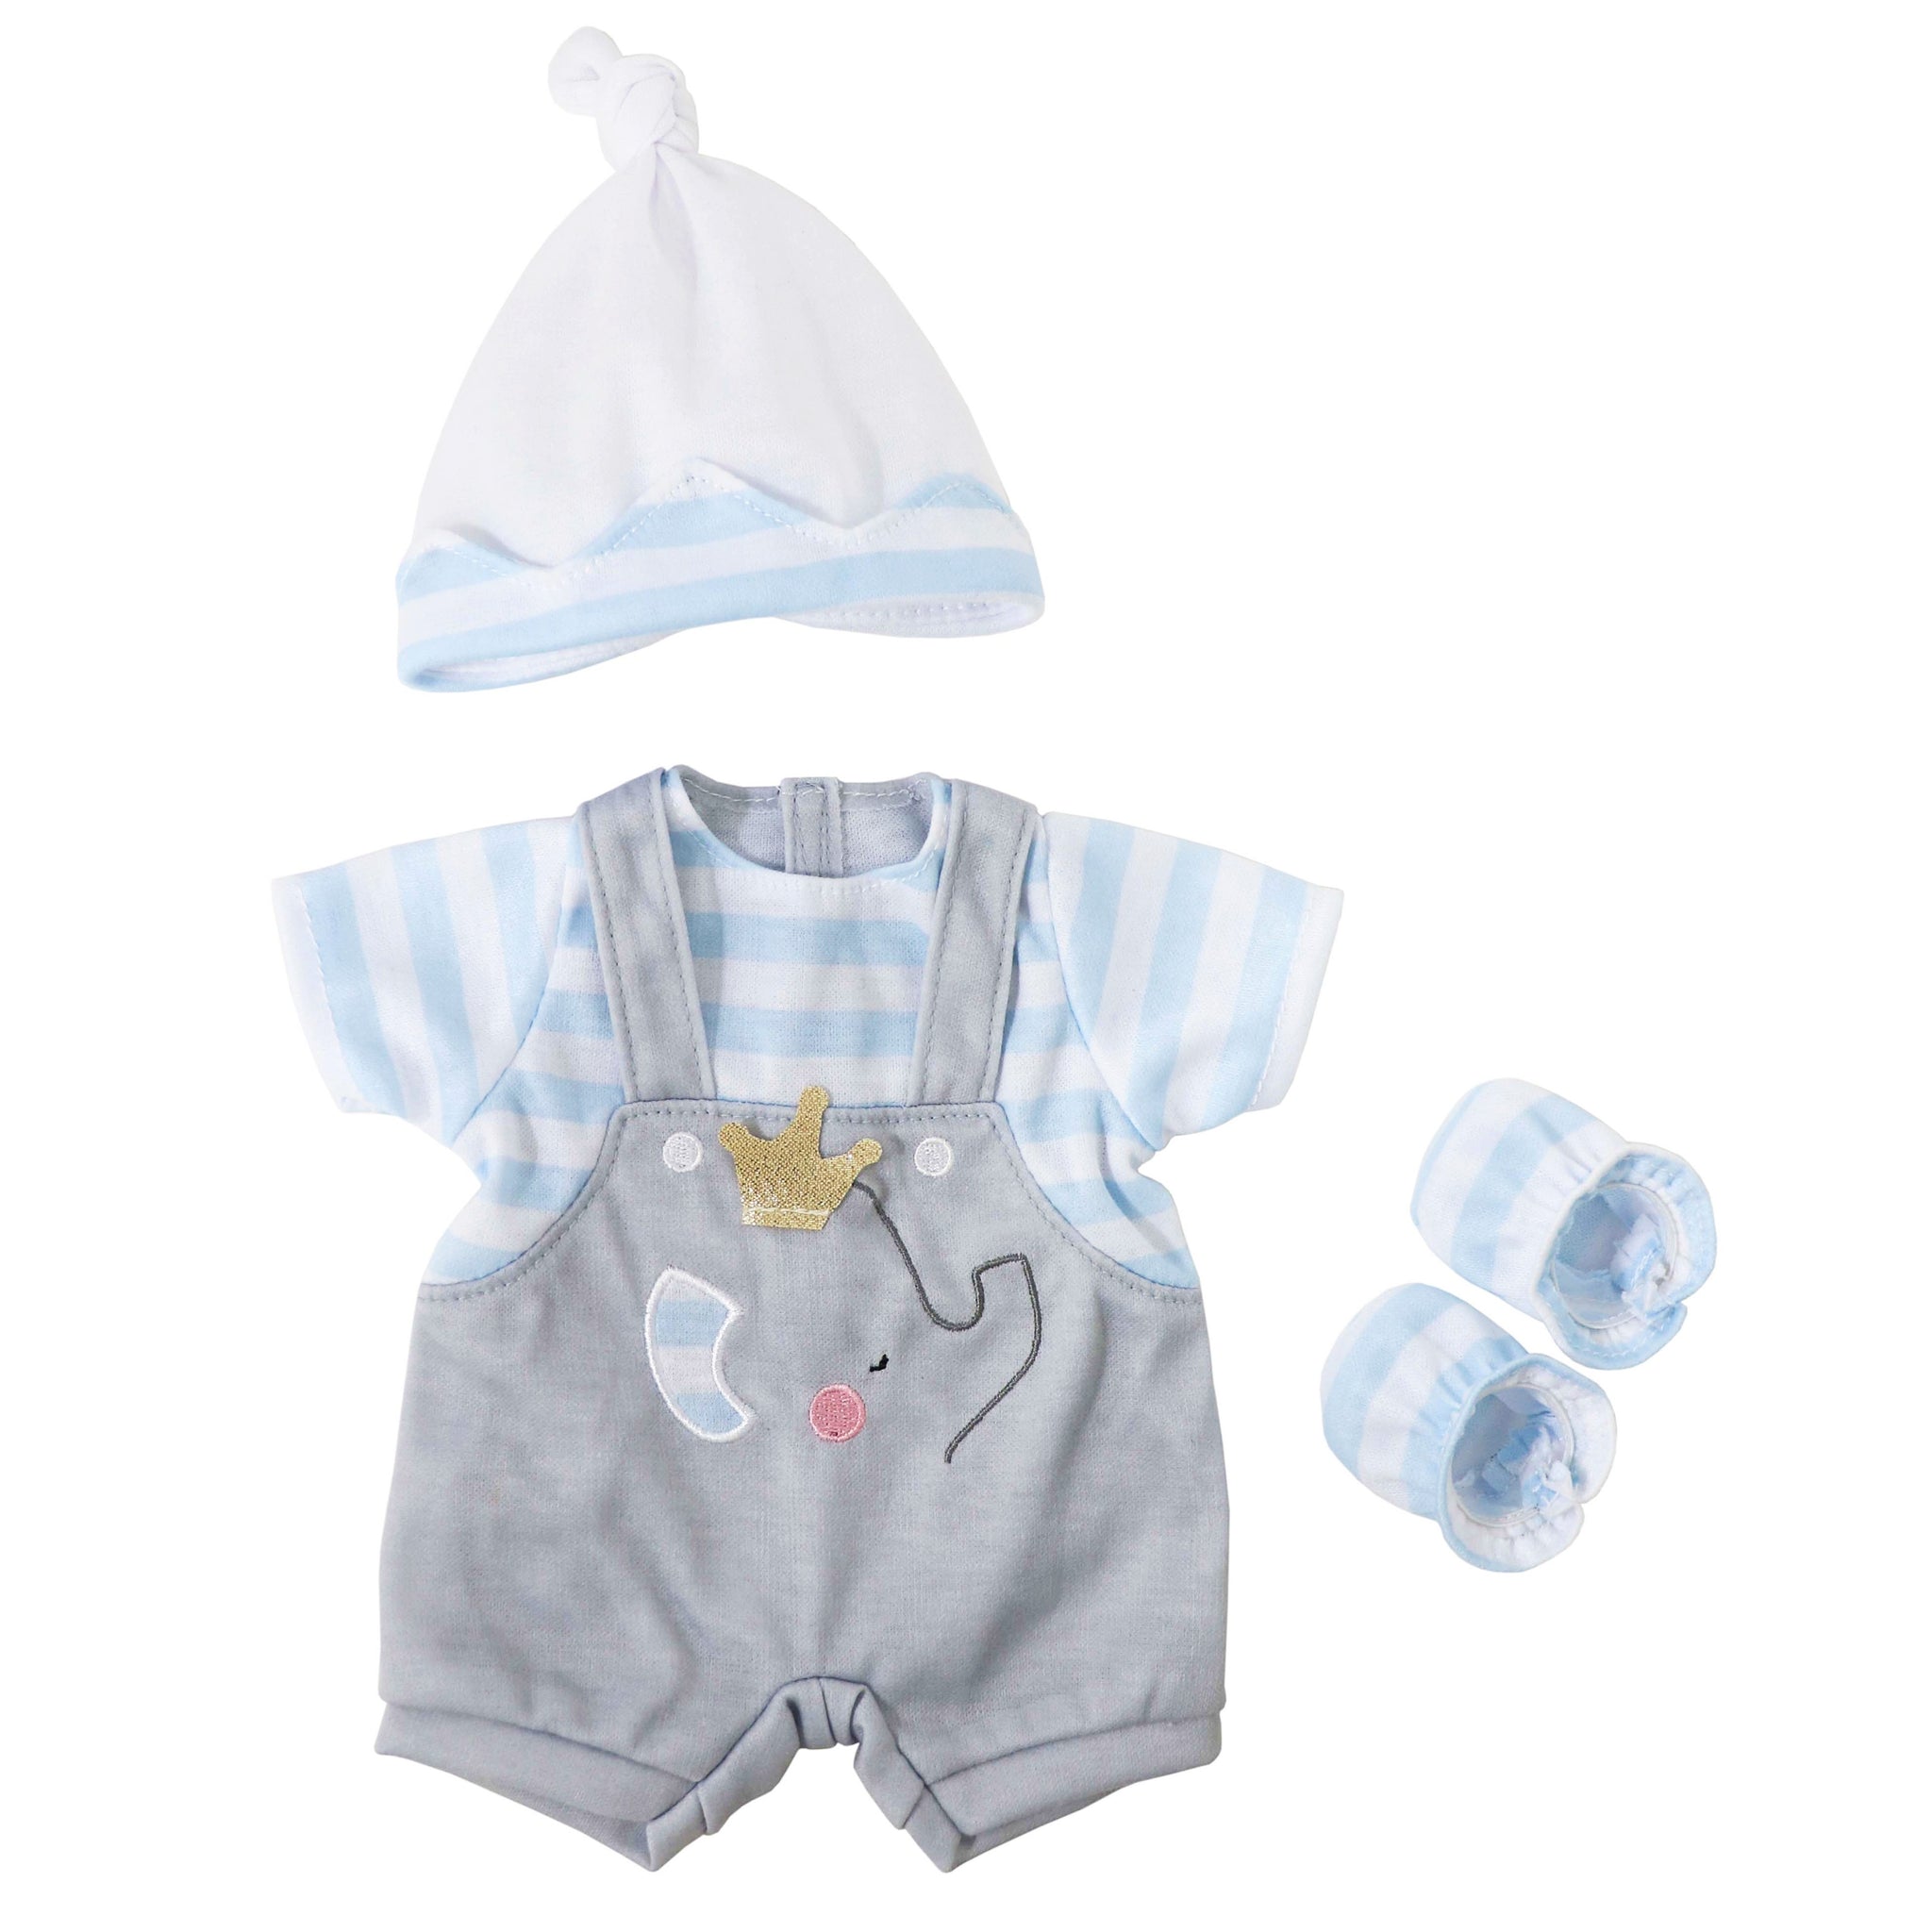 JC Toys Berenguer Boutique Baby Doll Outfit Gray Overall Shorts with Blue Stripes Includes Headband and Booties